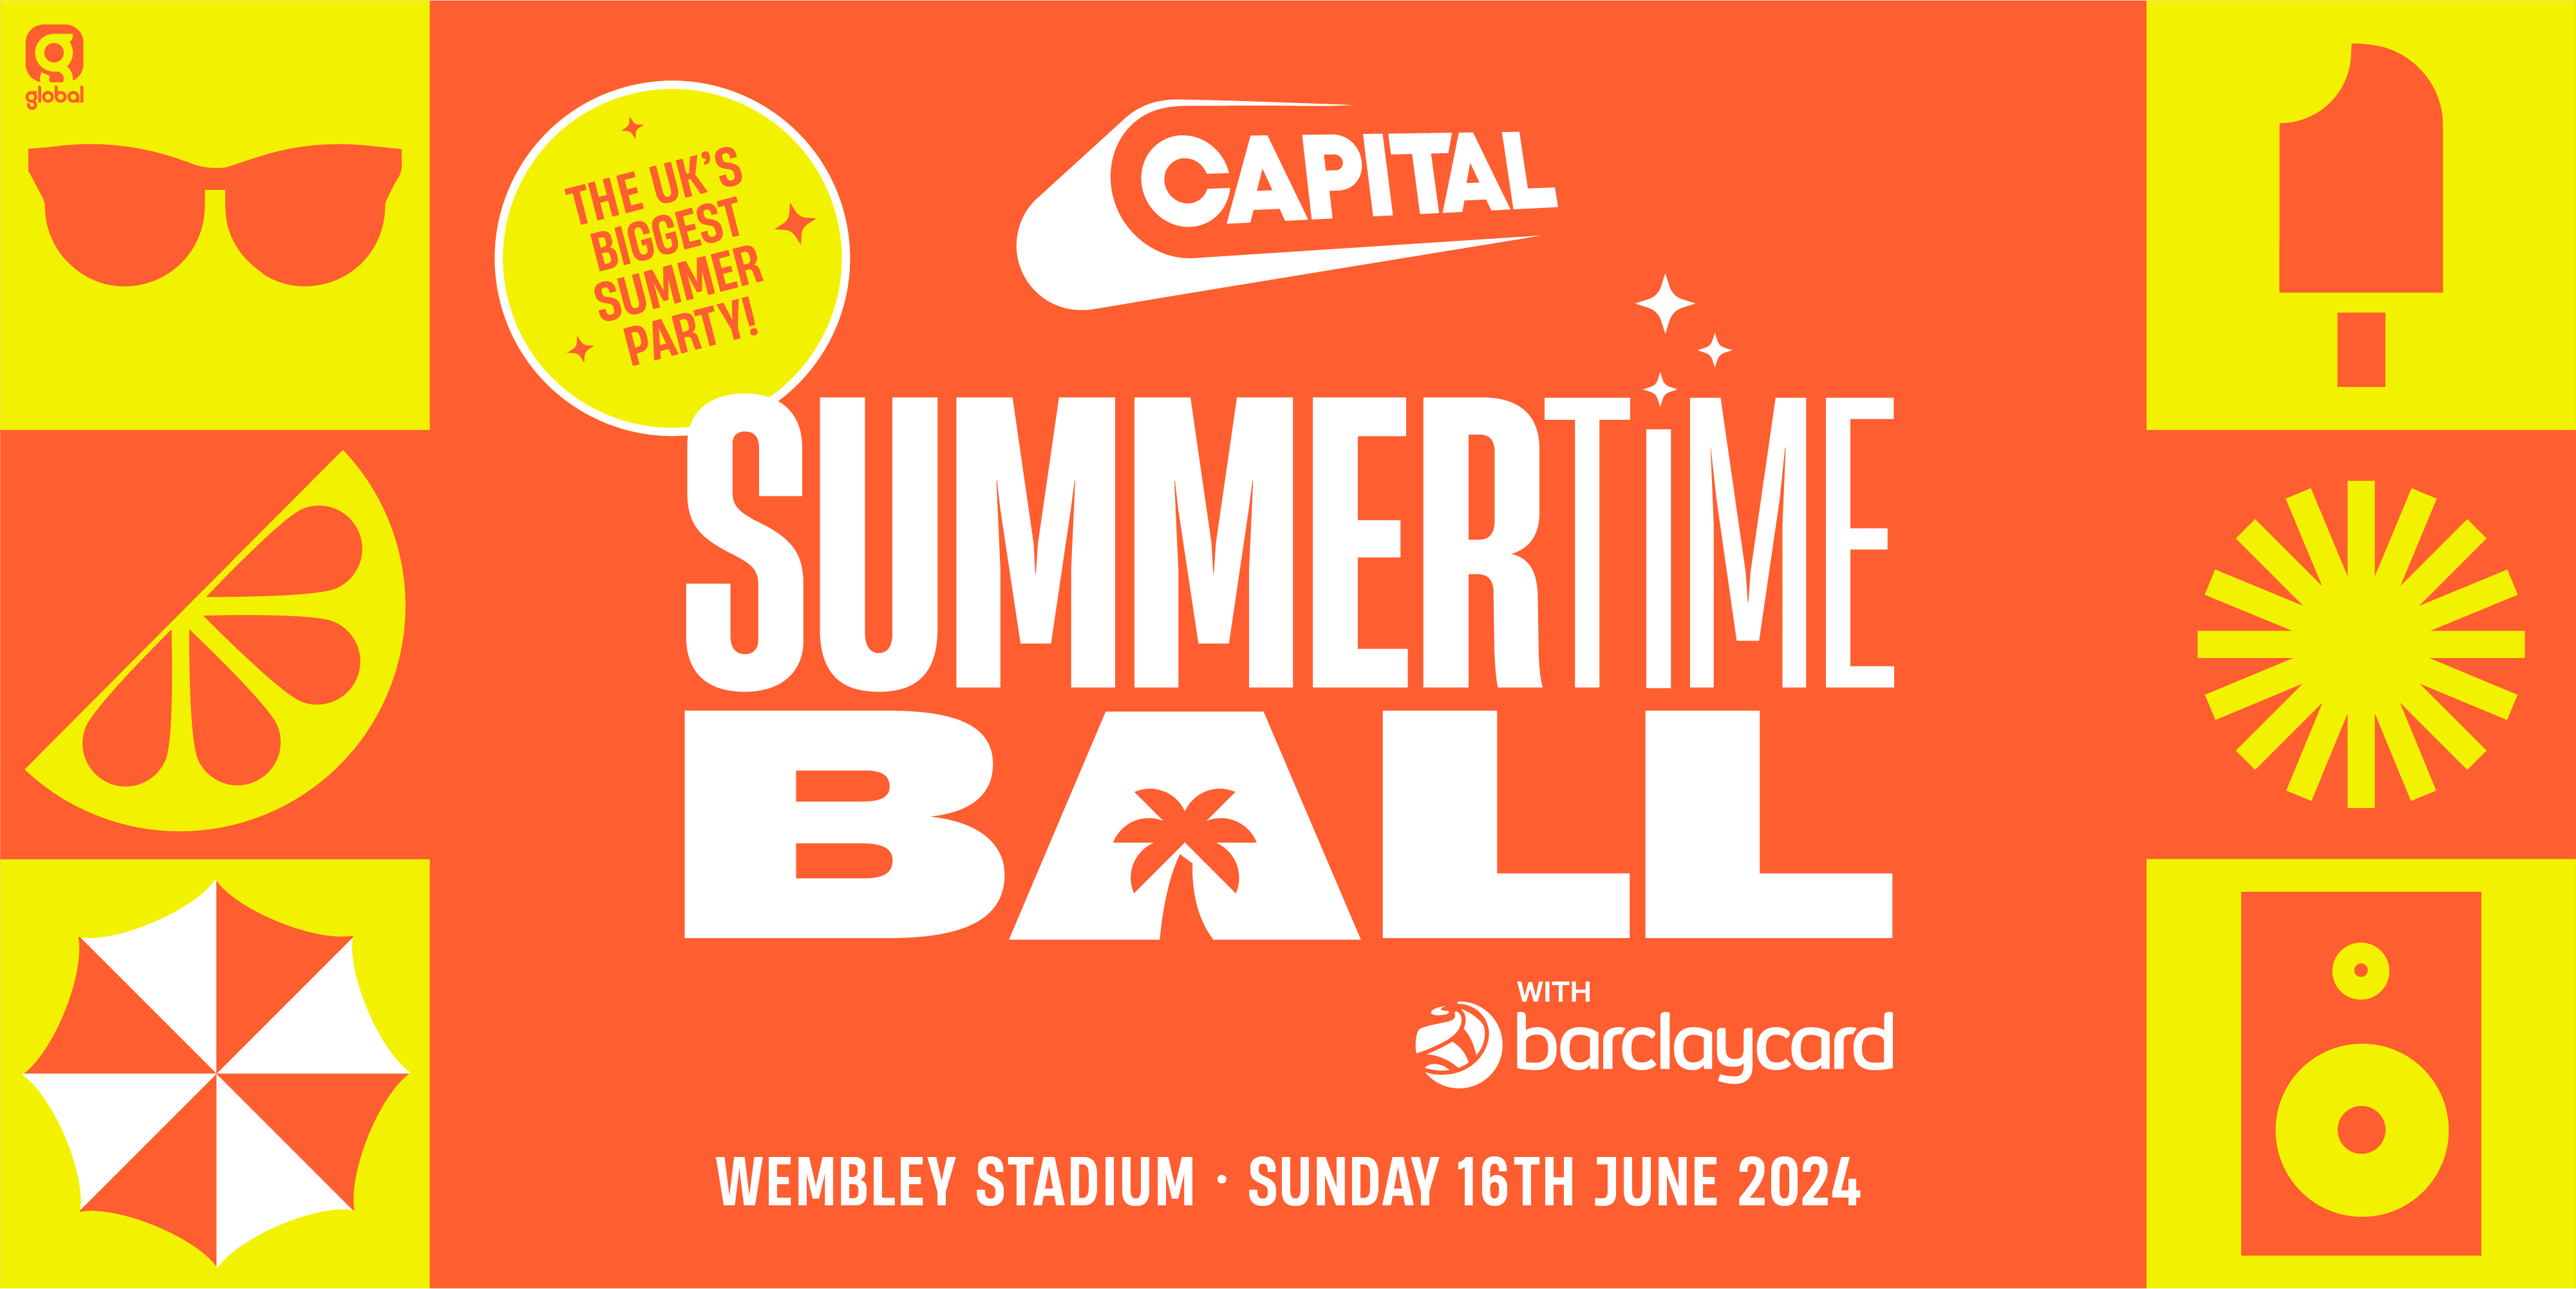 Full lineup announced for Capital’s Summertime Ball 2024 RadioToday